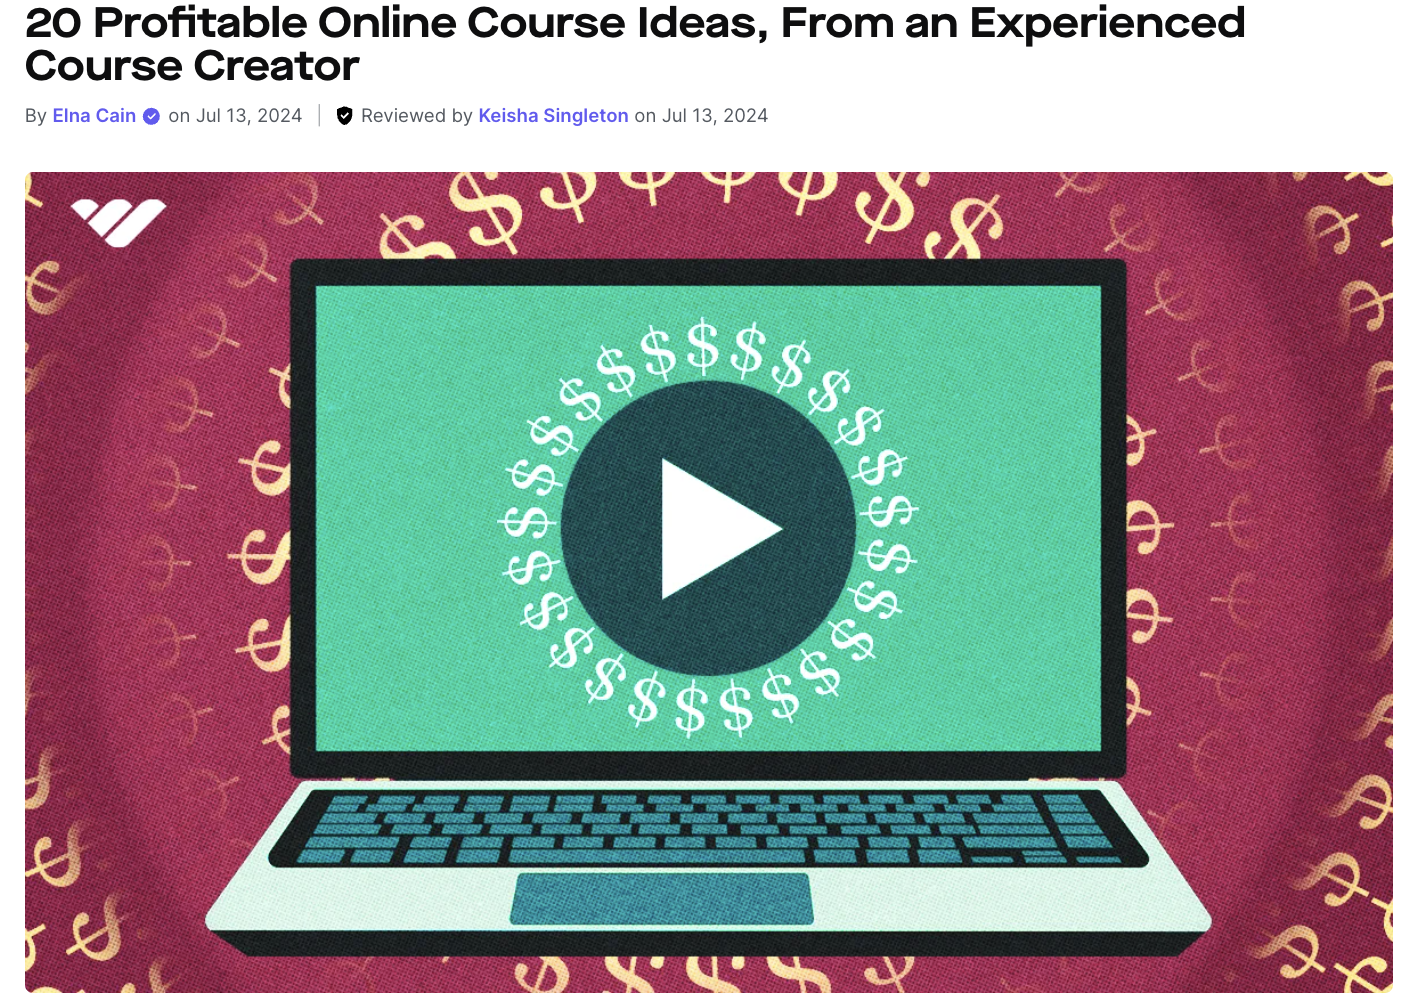 20 Profitable Online Course Ideas, From an Experienced Course Creator